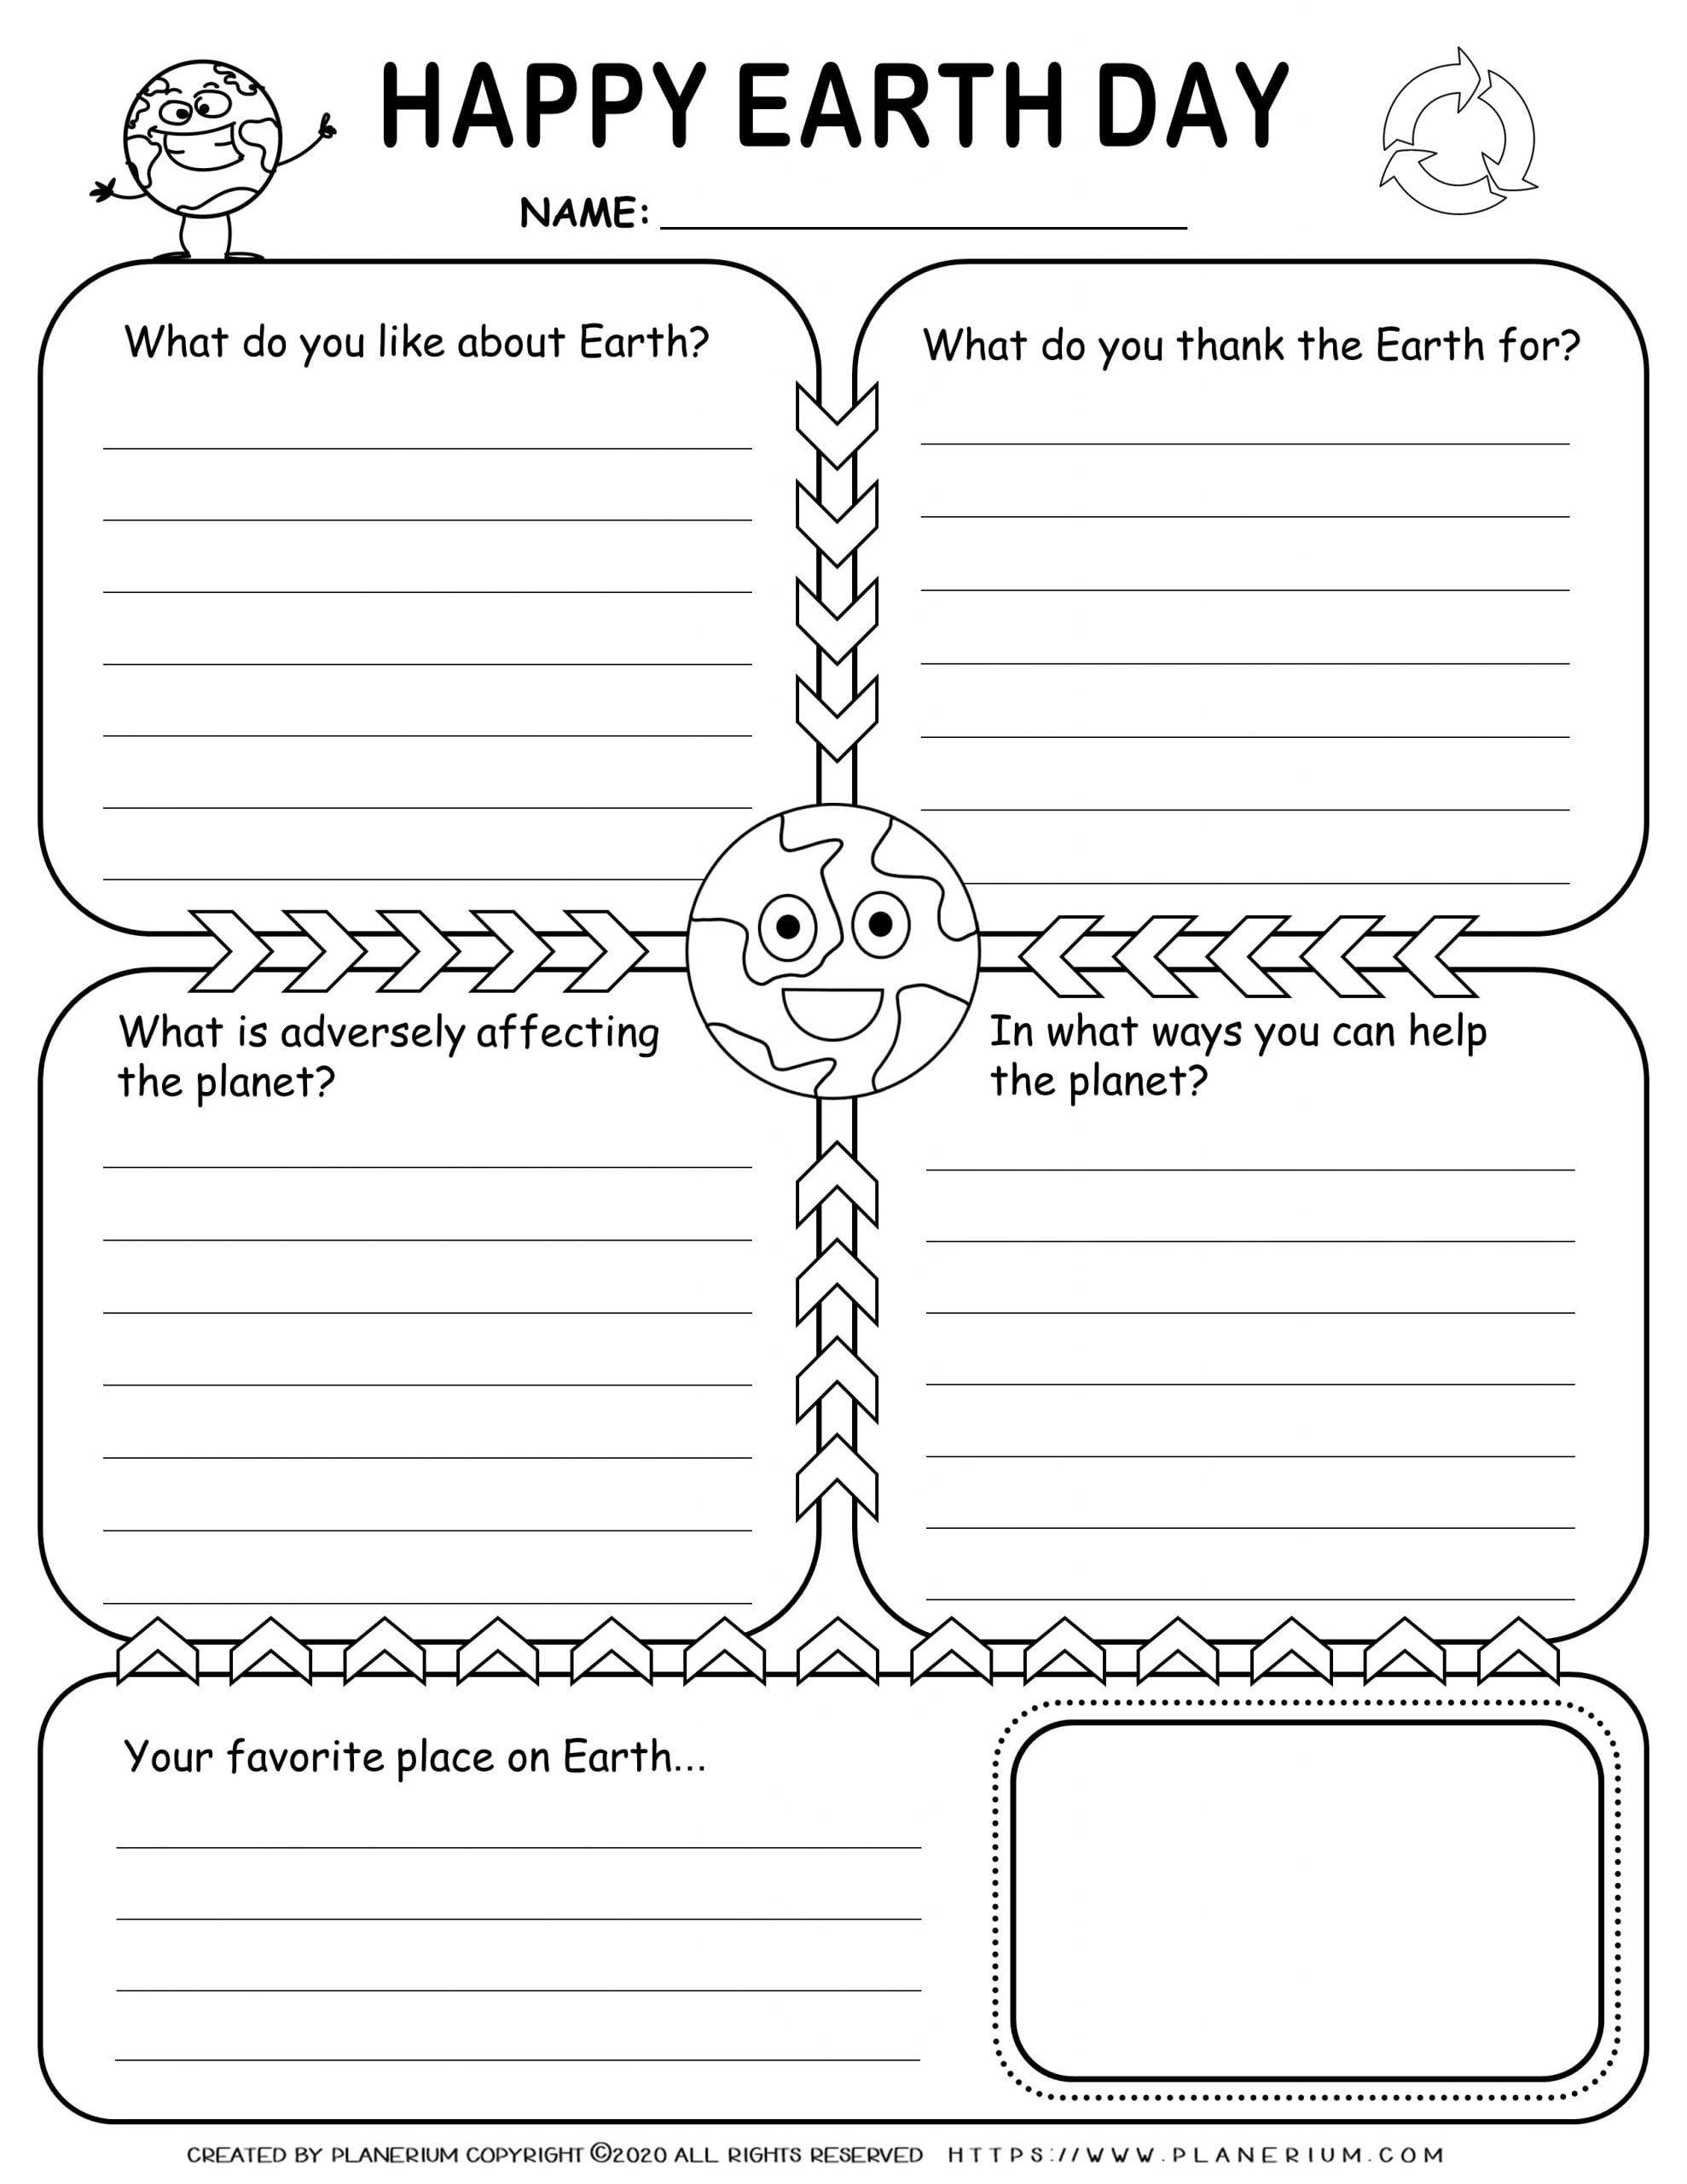 Earth day - Worksheet - Write about planet Earth